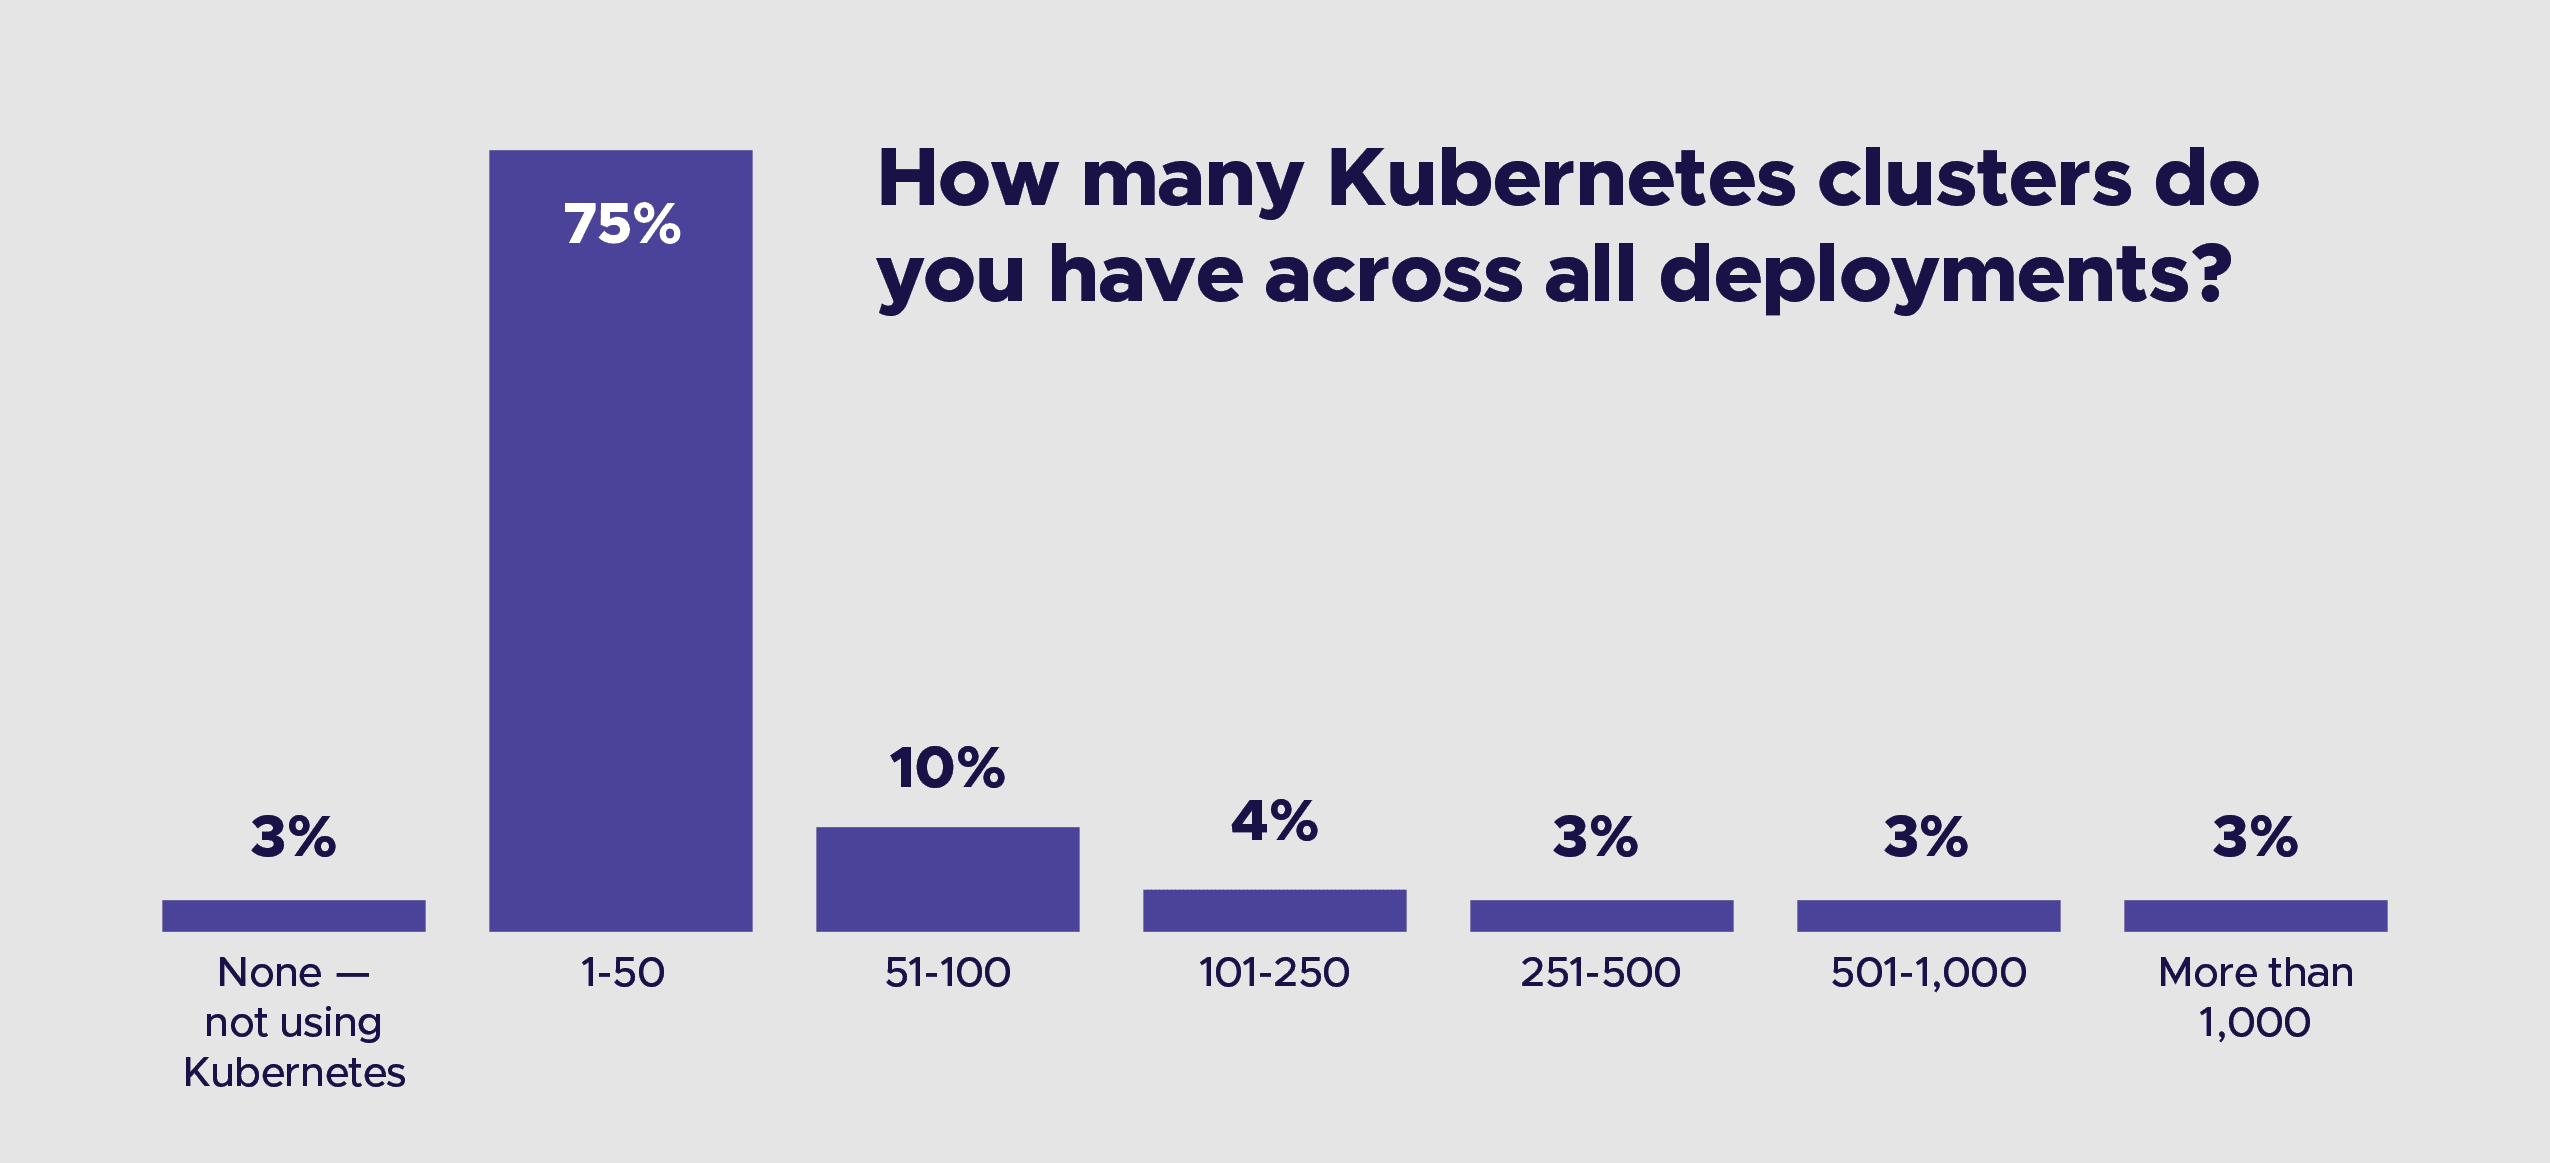 Bar chart showing respondents' respond towards question "How many Kubernetes clusters do you have across all deployments?" 75% respondents chose "1-50"